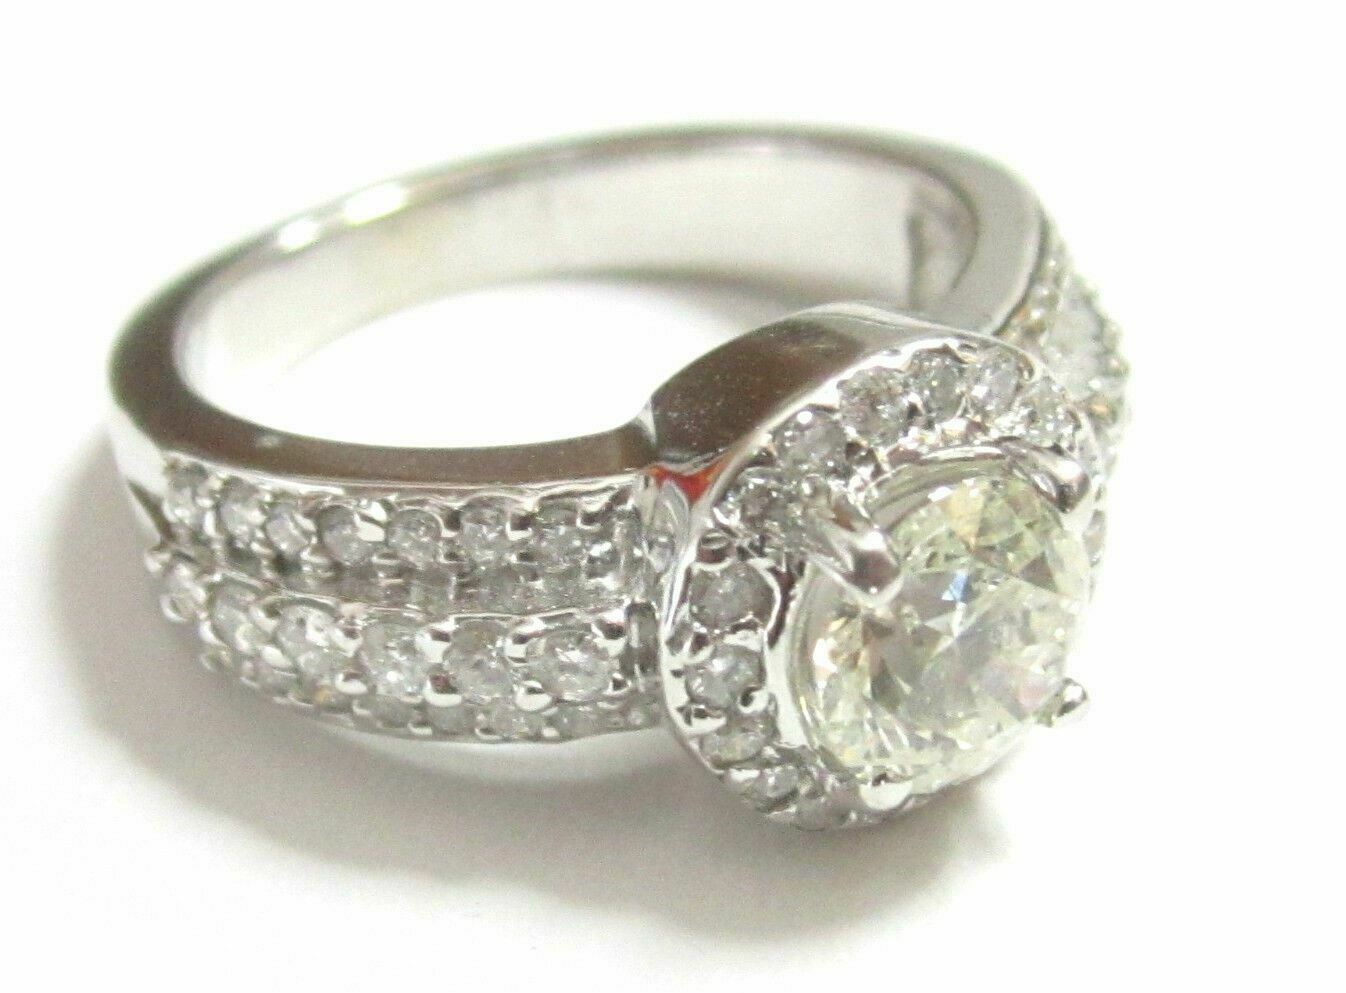 2.71 TCW Round Diamond Solitaire Engagement Ring G SI2 Size 6.5 14k White Gold